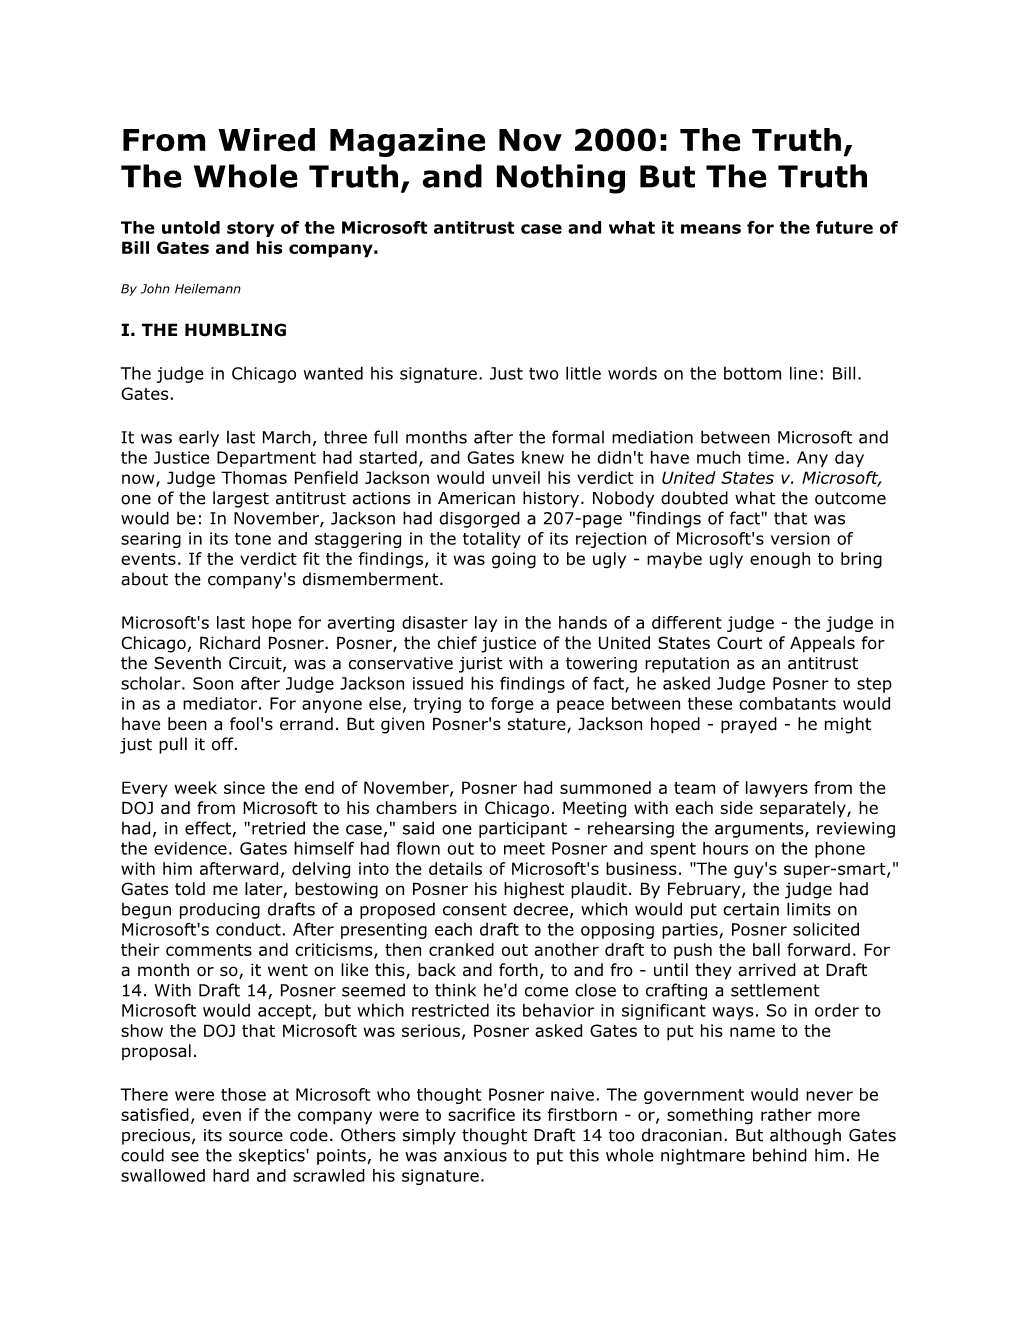 From Wired Magazine Nov 2000: the Truth, the Whole Truth, and Nothing but the Truth